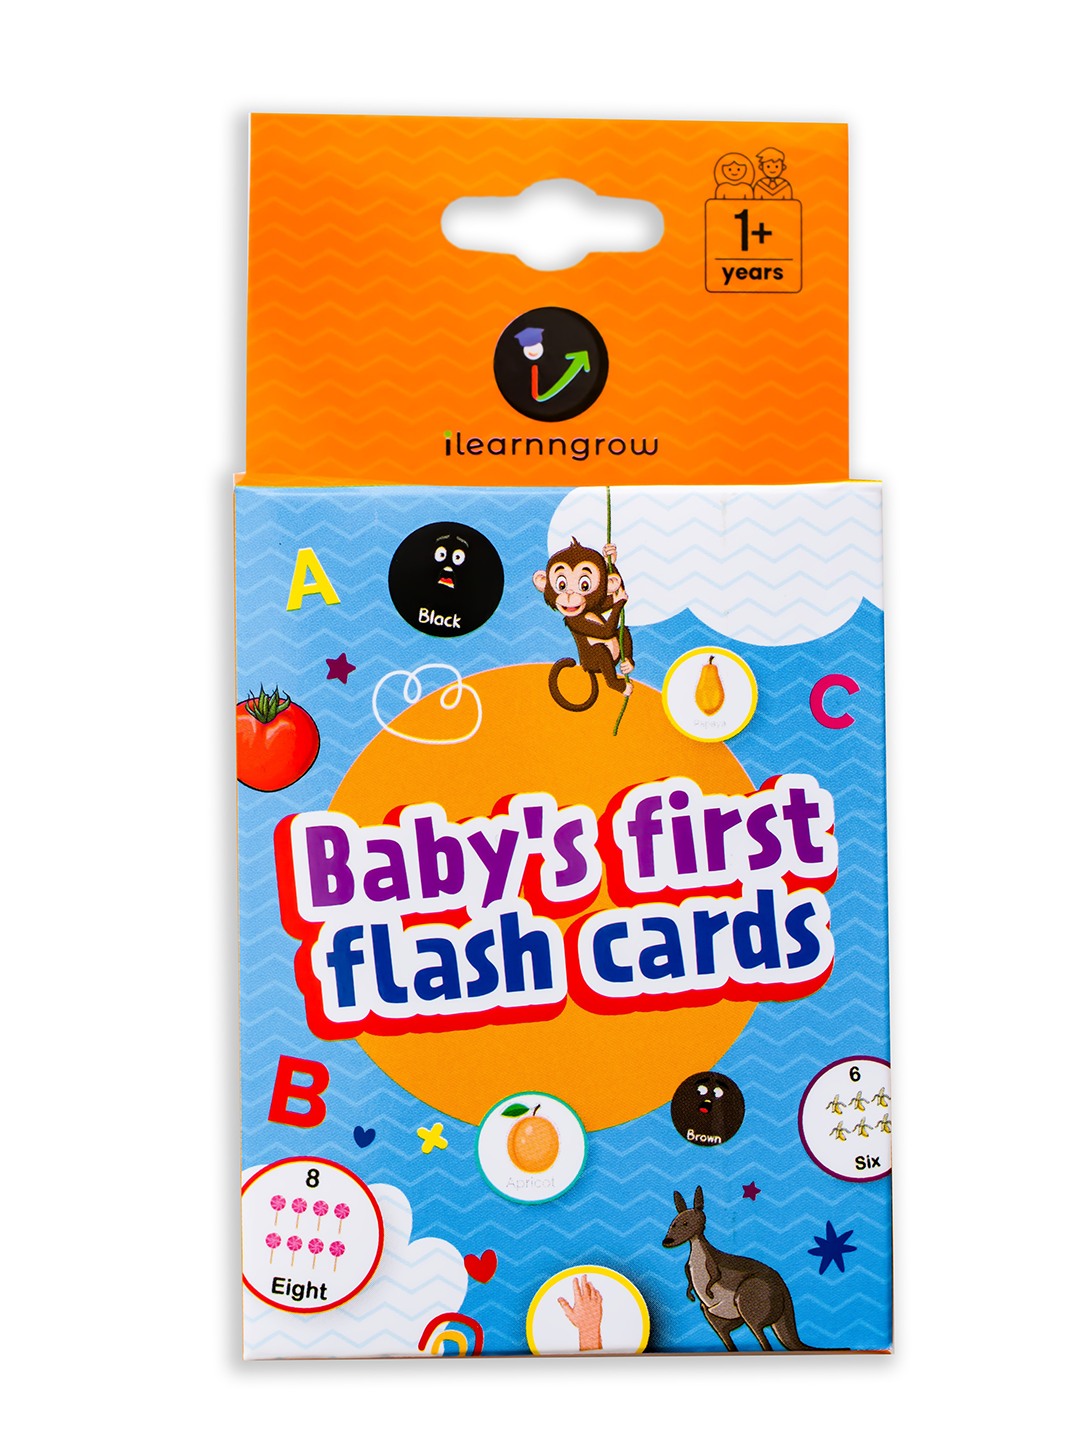 Baby's First Shape Flash Cards